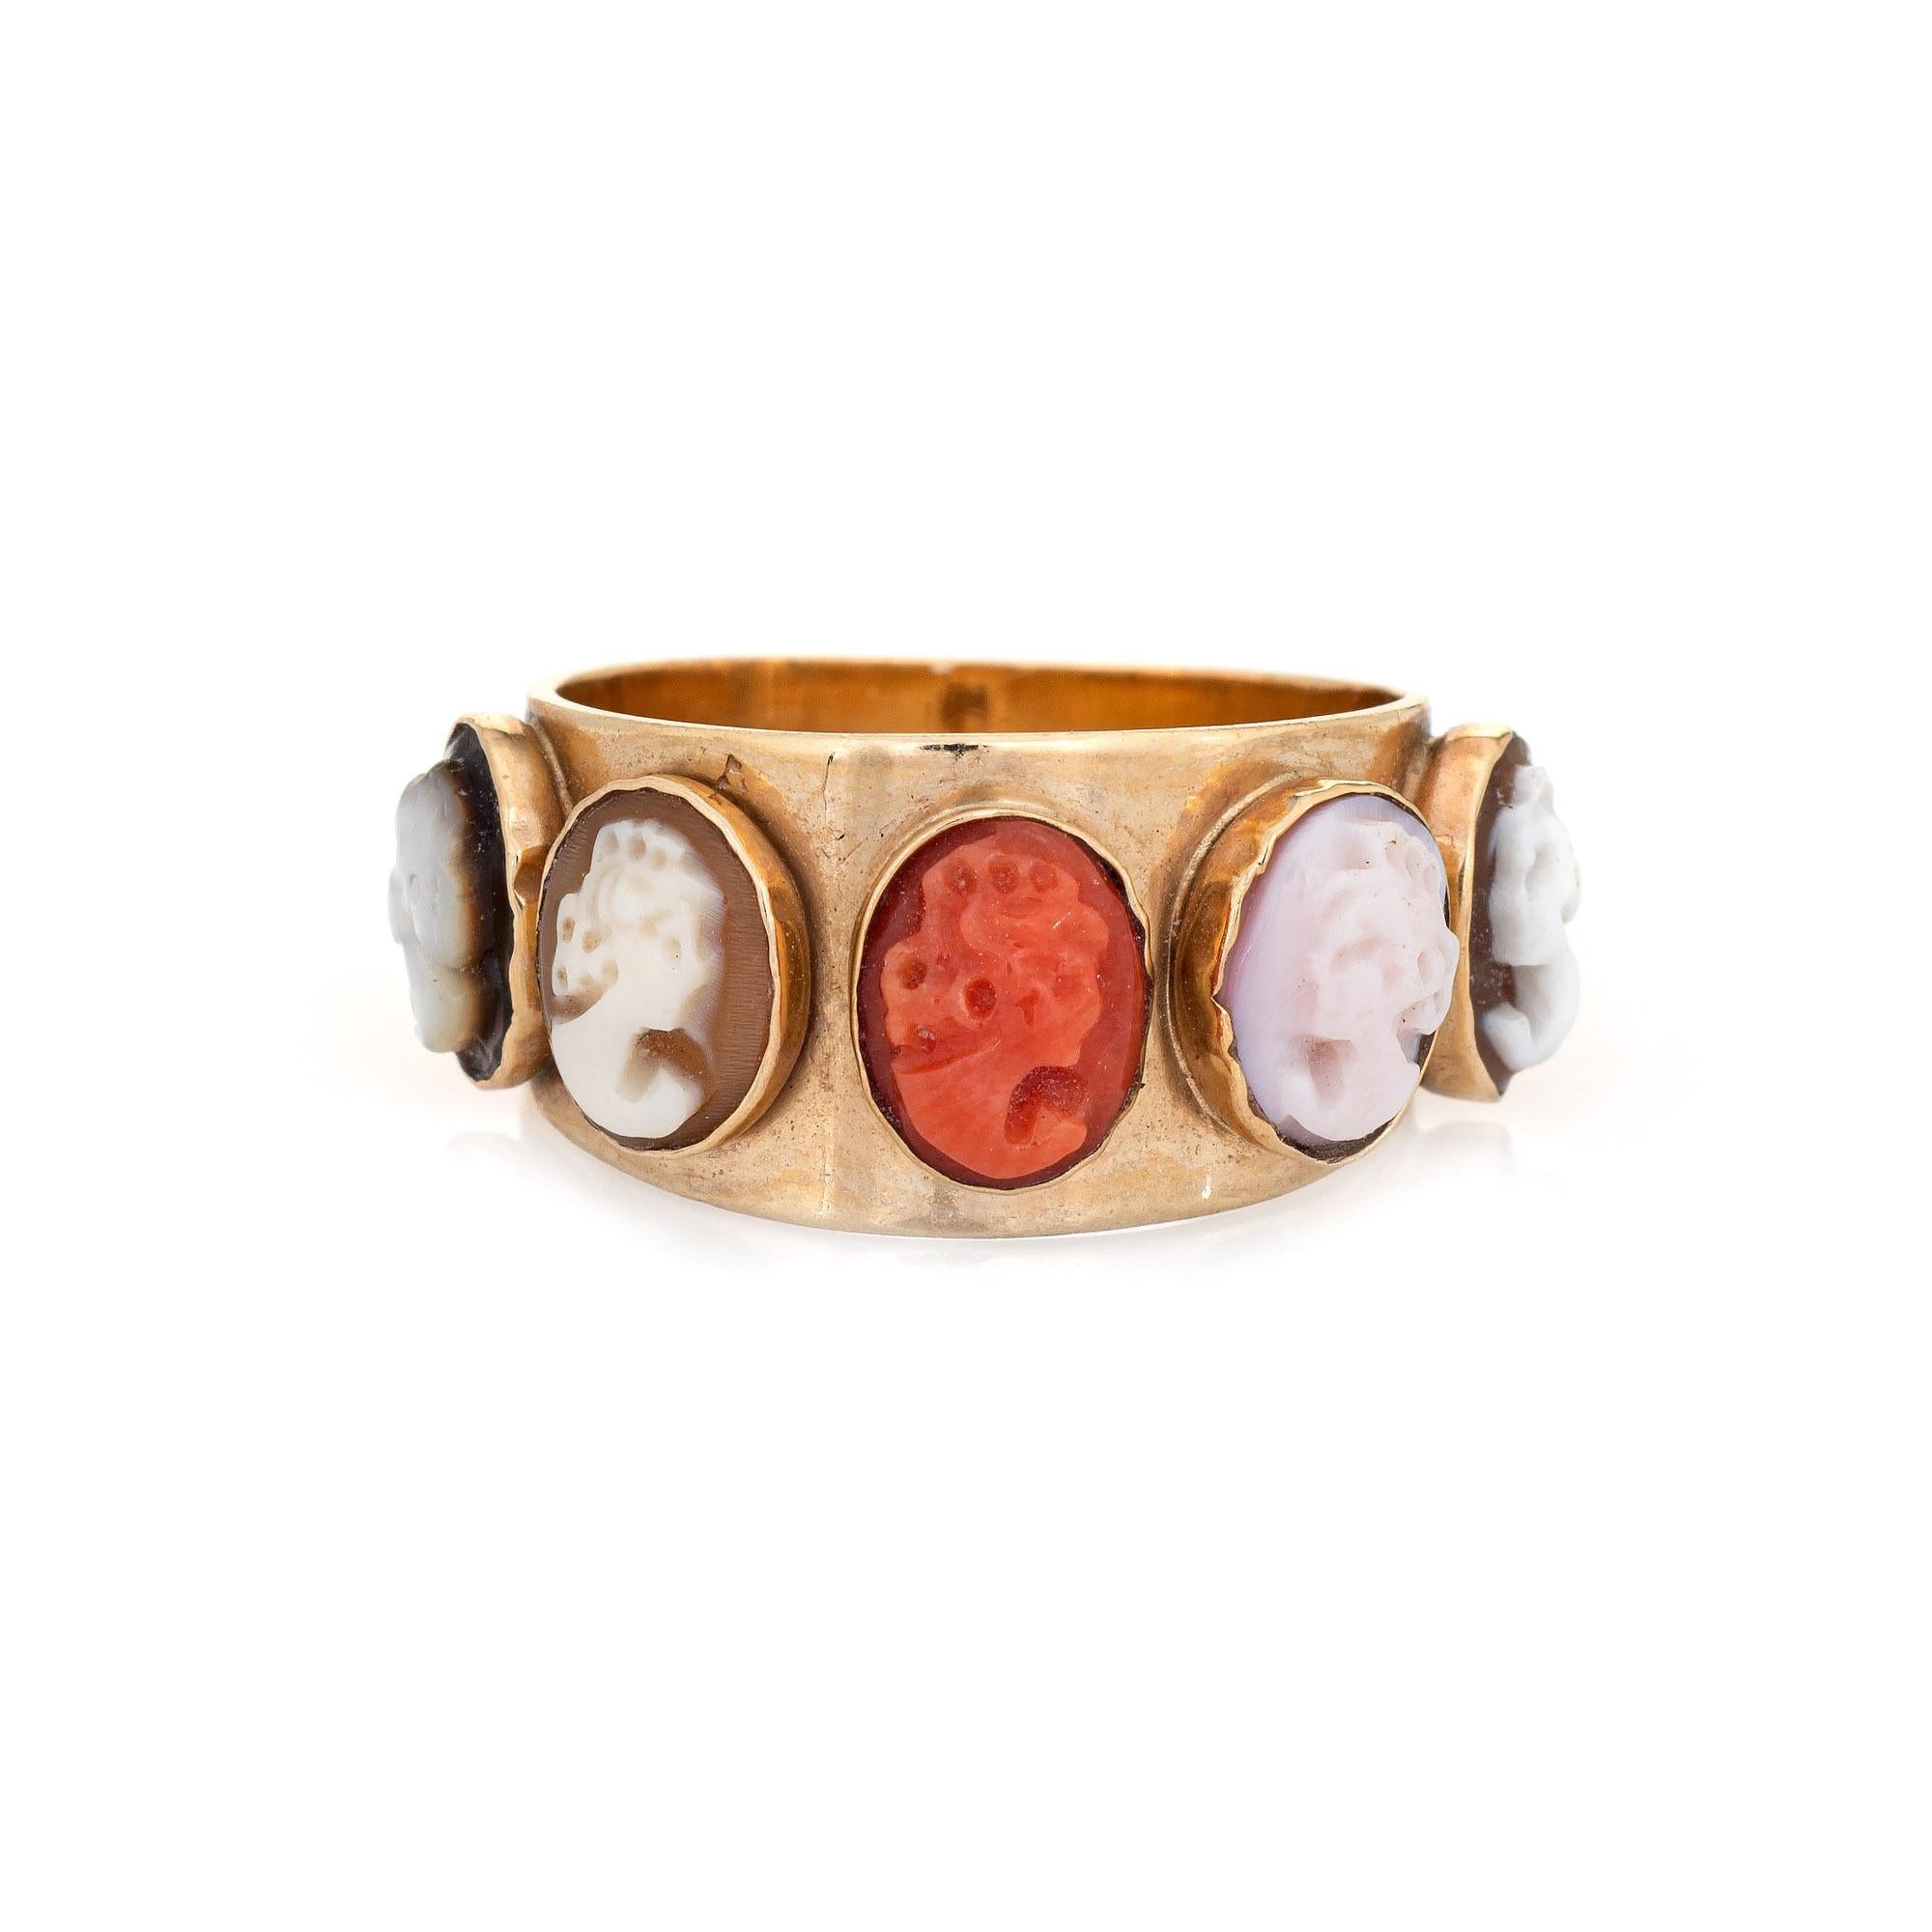 Stylish vintage five panel cameo ring (circa 1950s to 1960s) crafted in 14 karat yellow gold. 

Five cameos (agate, shell and coral) measure 6mm x 5mm. The cameos are in very good condition and free of cracks or chips. 

The five cameo ring